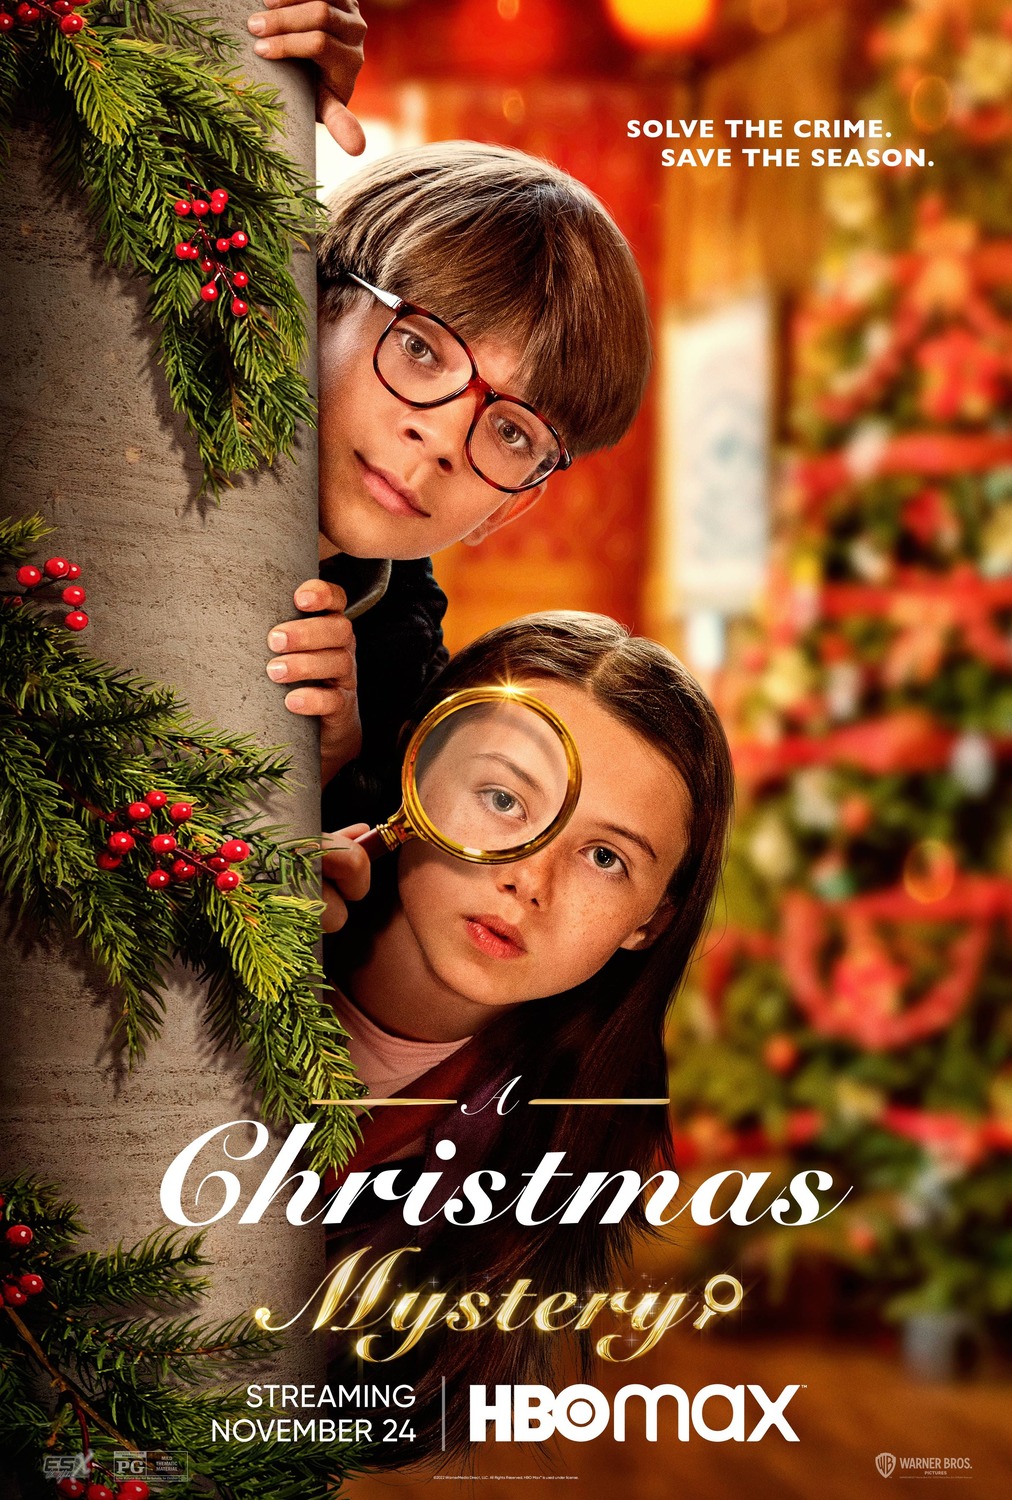 Extra Large Movie Poster Image for A Christmas Mystery 